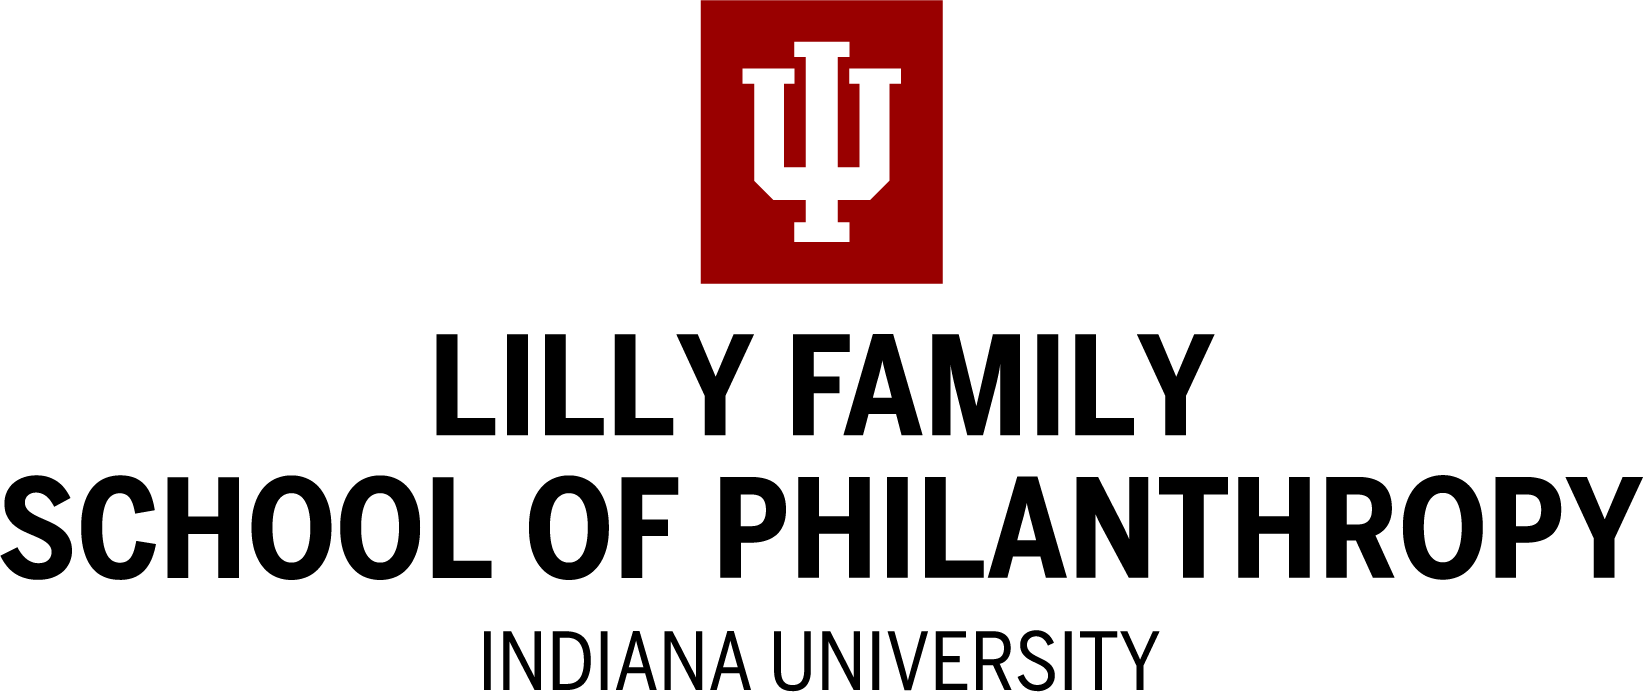 LillyFamilySchoolofPhilanthropy_IndianaUniversity.png